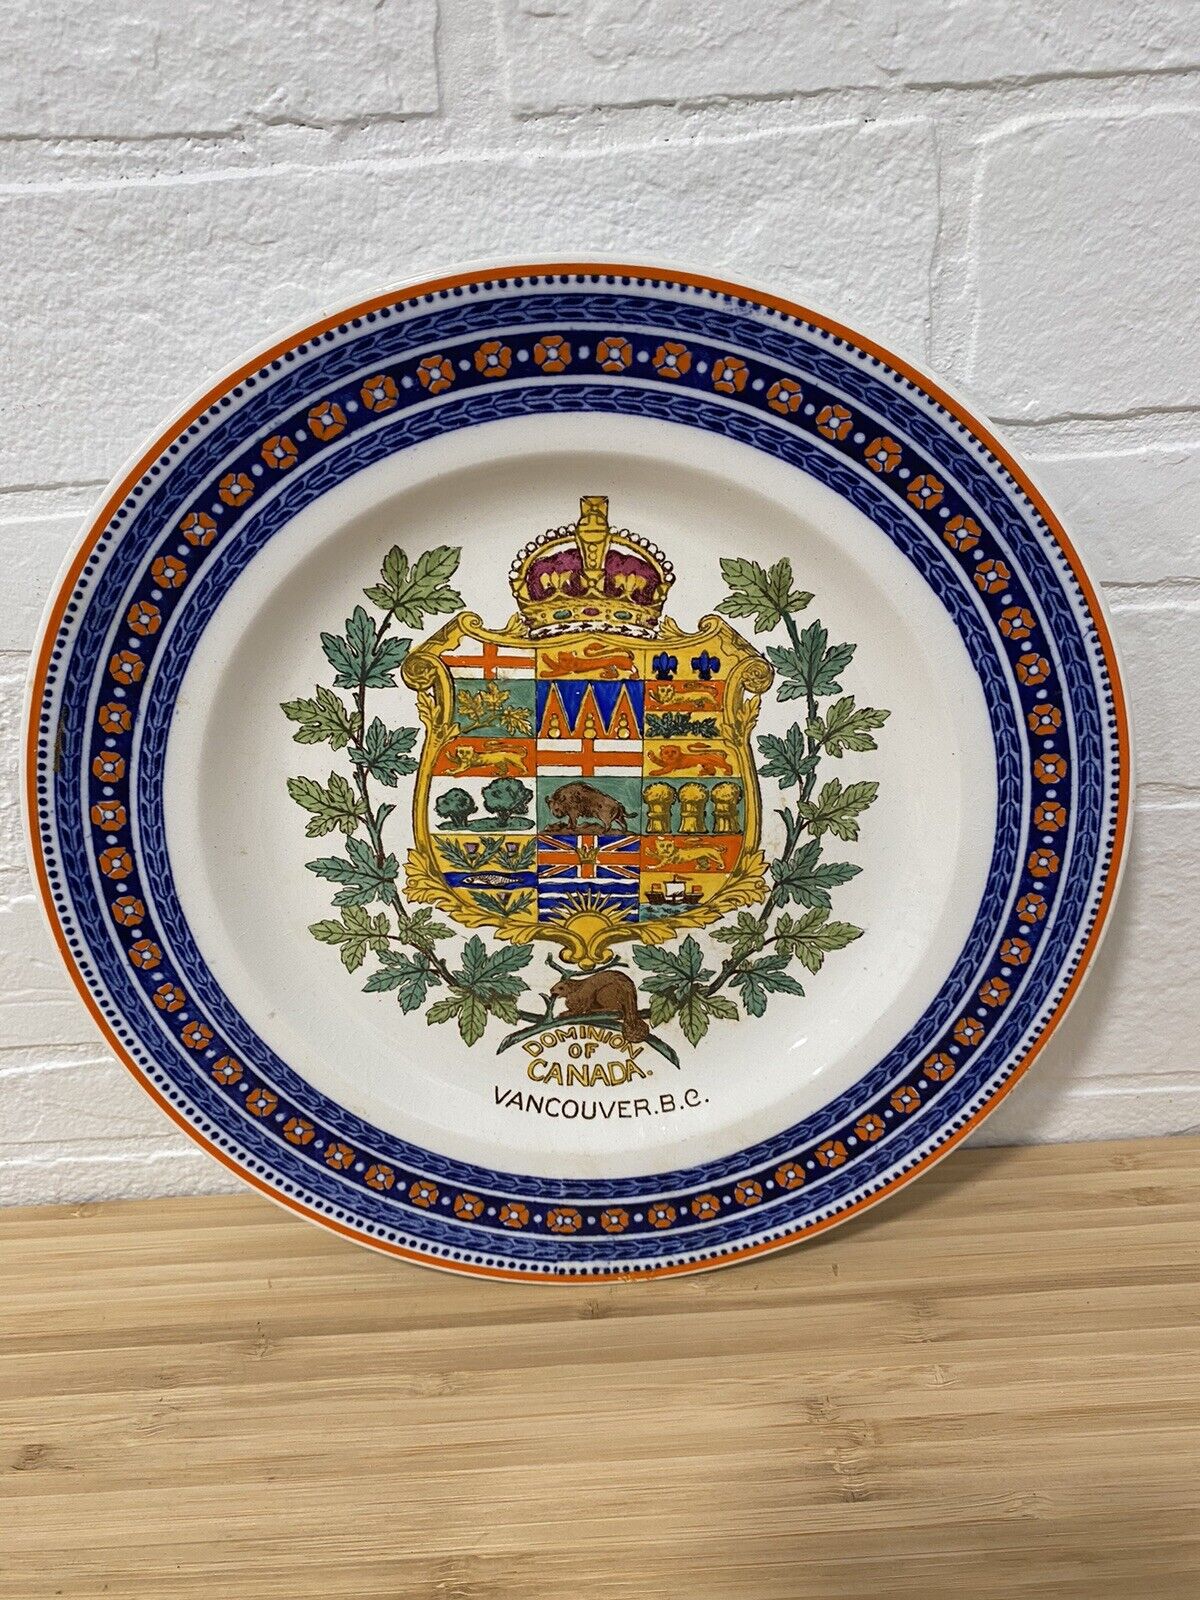 Wedgwood Plate Dominion of Canada Commemorative Vancouver BC C. 1900’s Rare